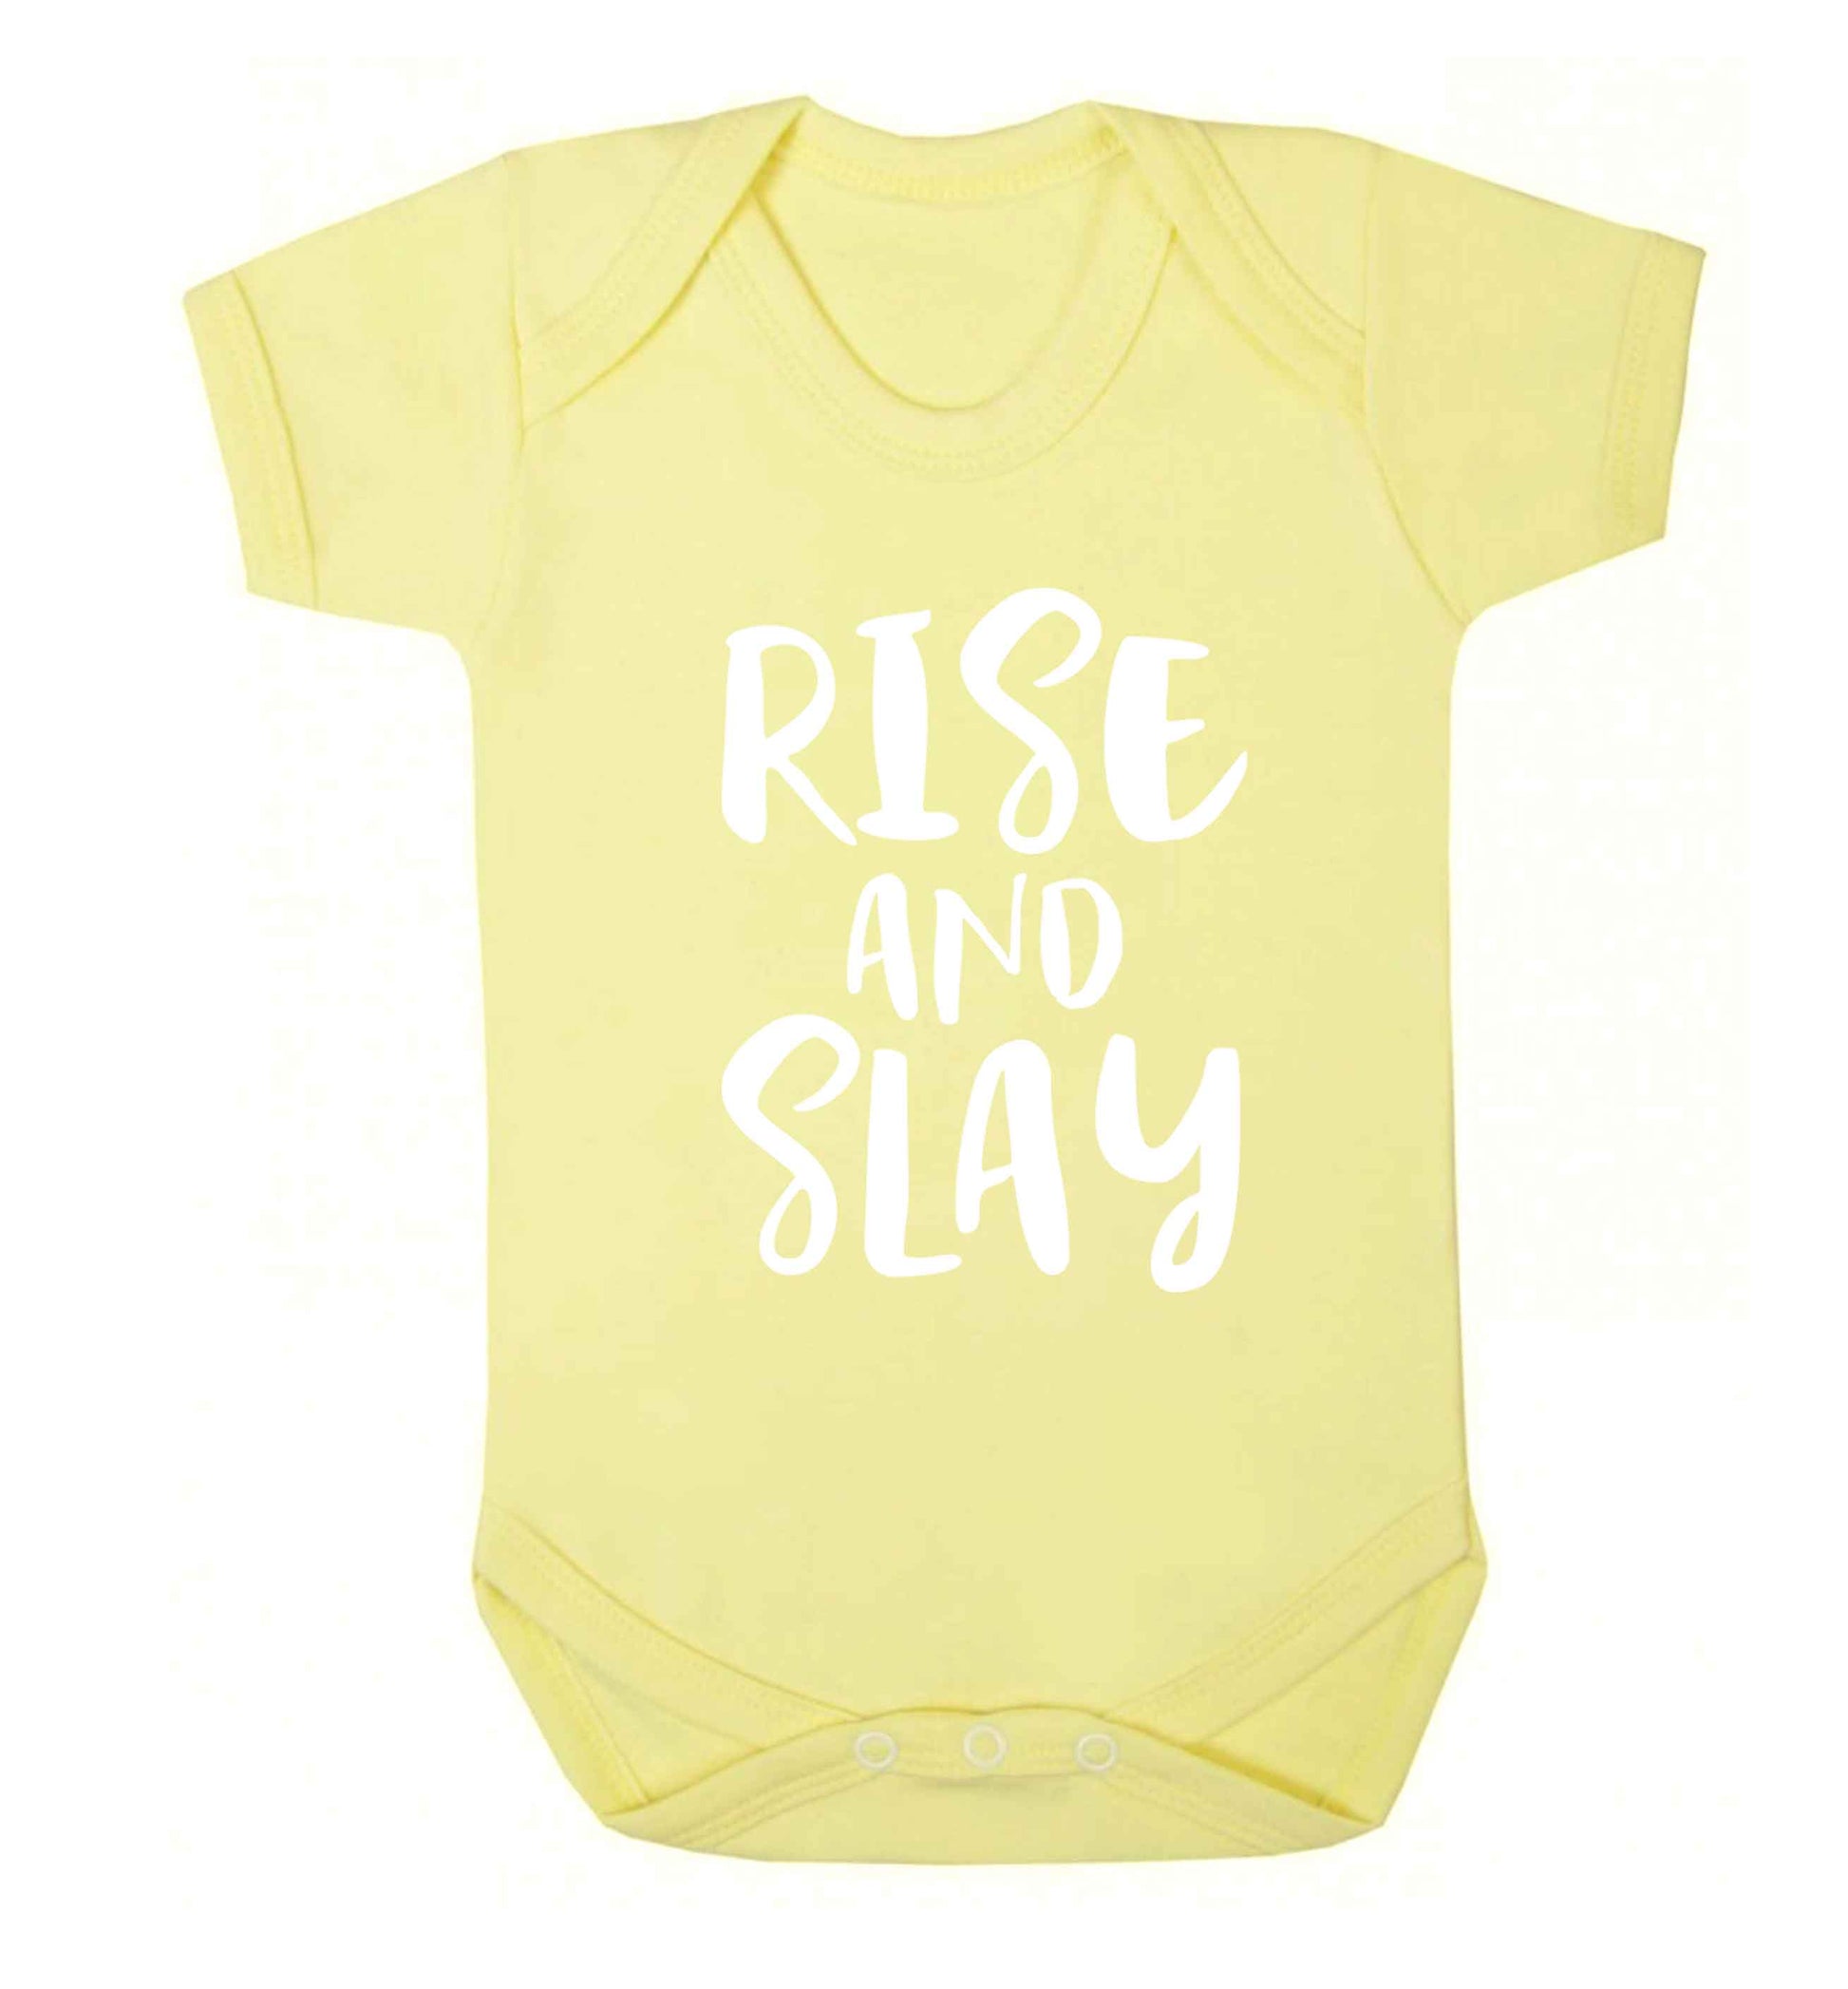 Rise and slay Baby Vest pale yellow 18-24 months